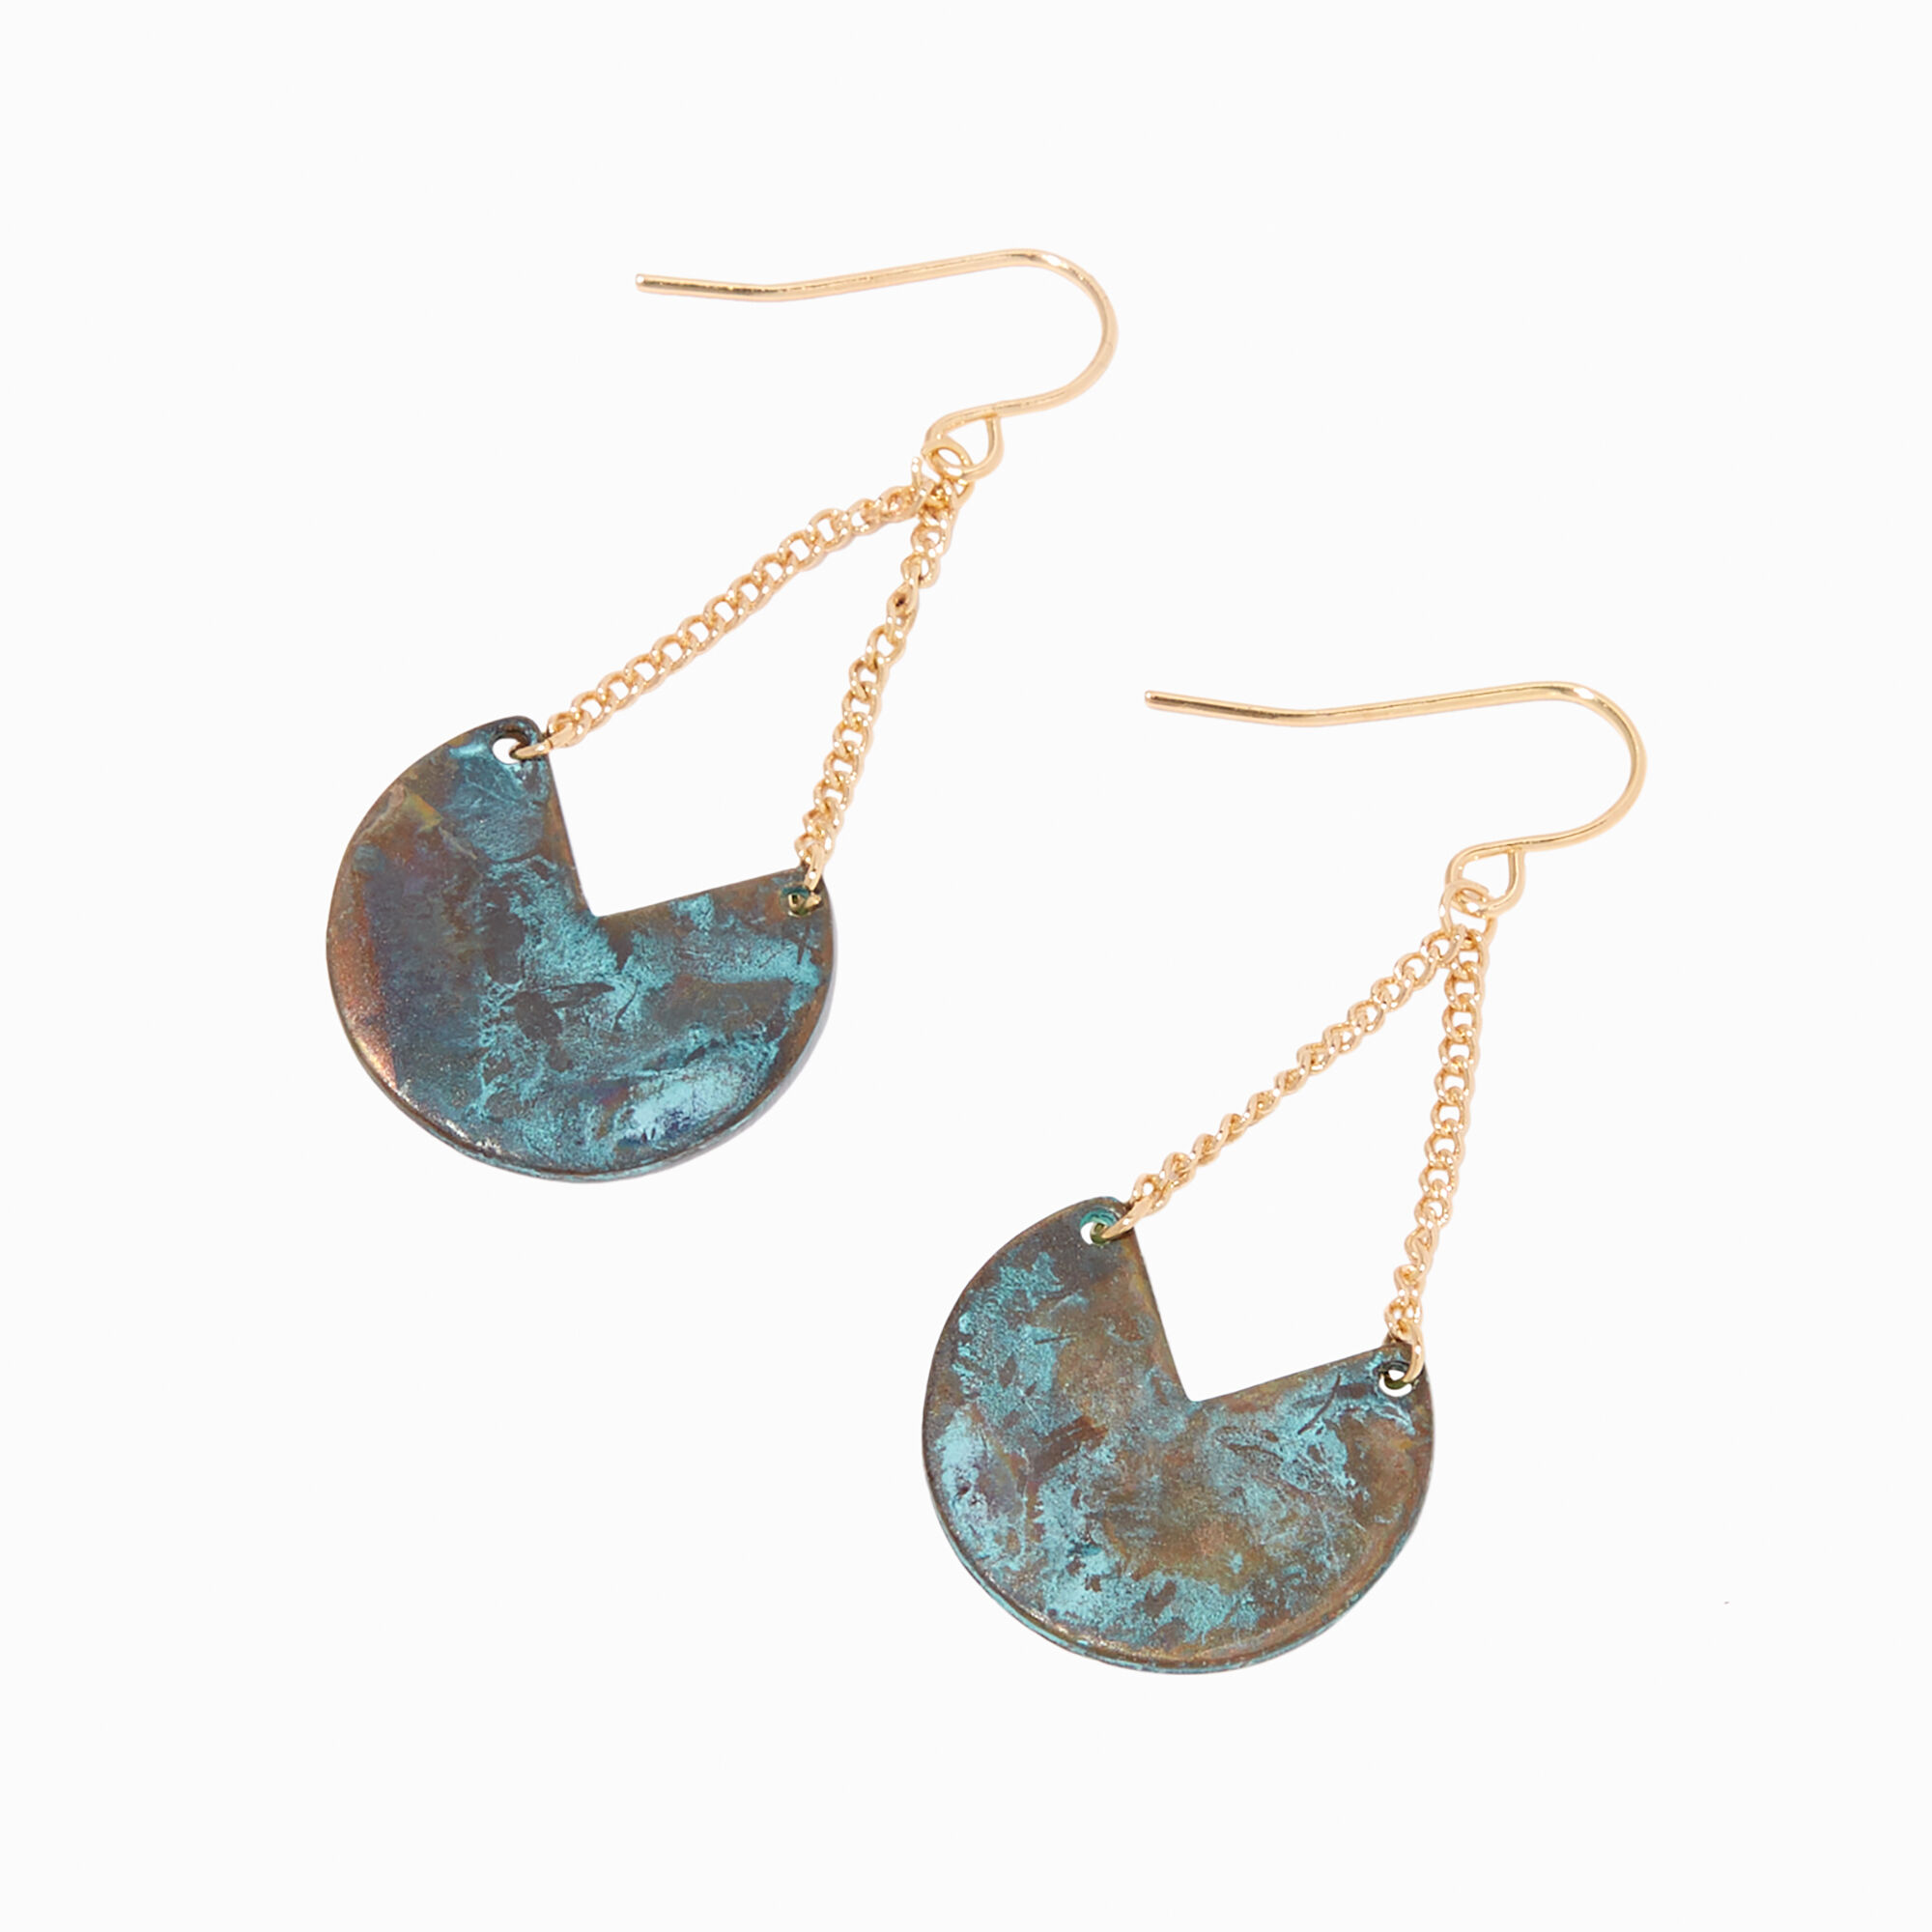 View Claires Tone 15 Patina Disc Drop Earrings Gold information